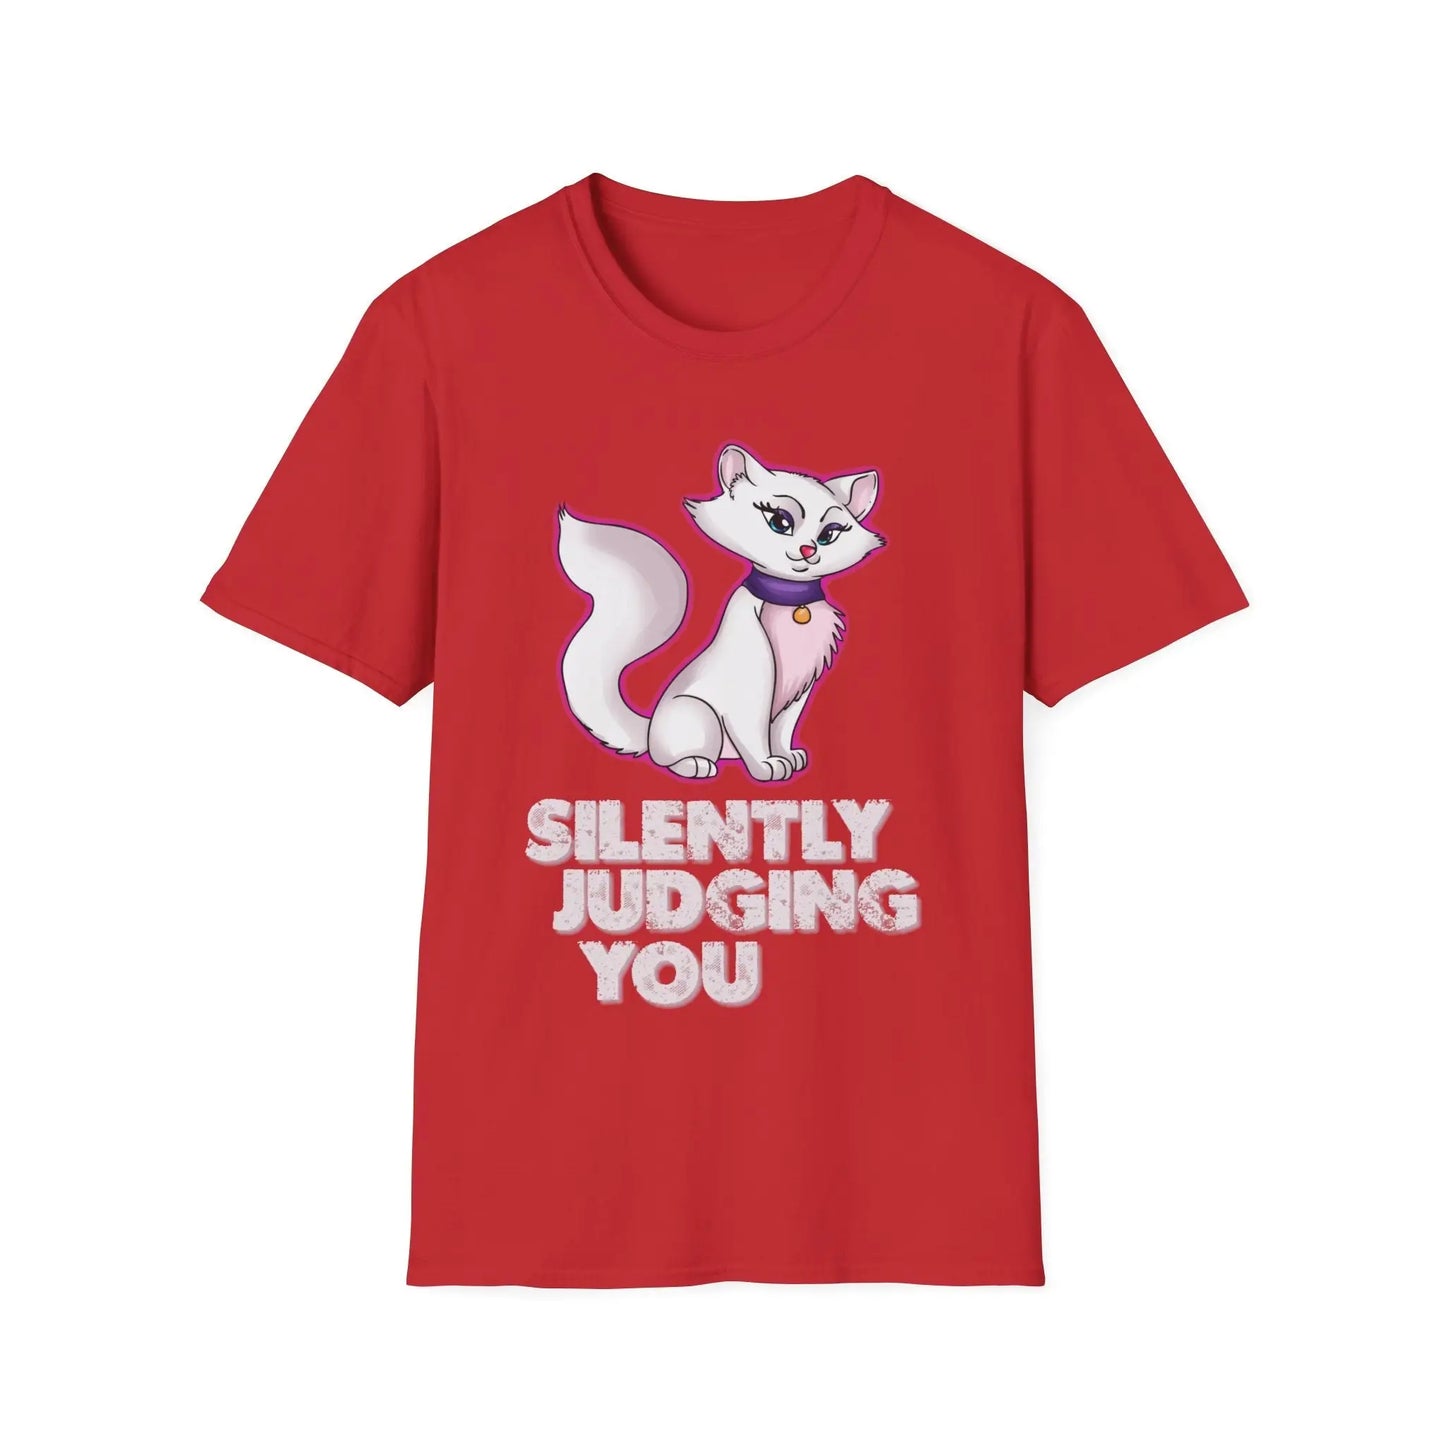 Silently Judging You Women's Tee - Wicked Tees